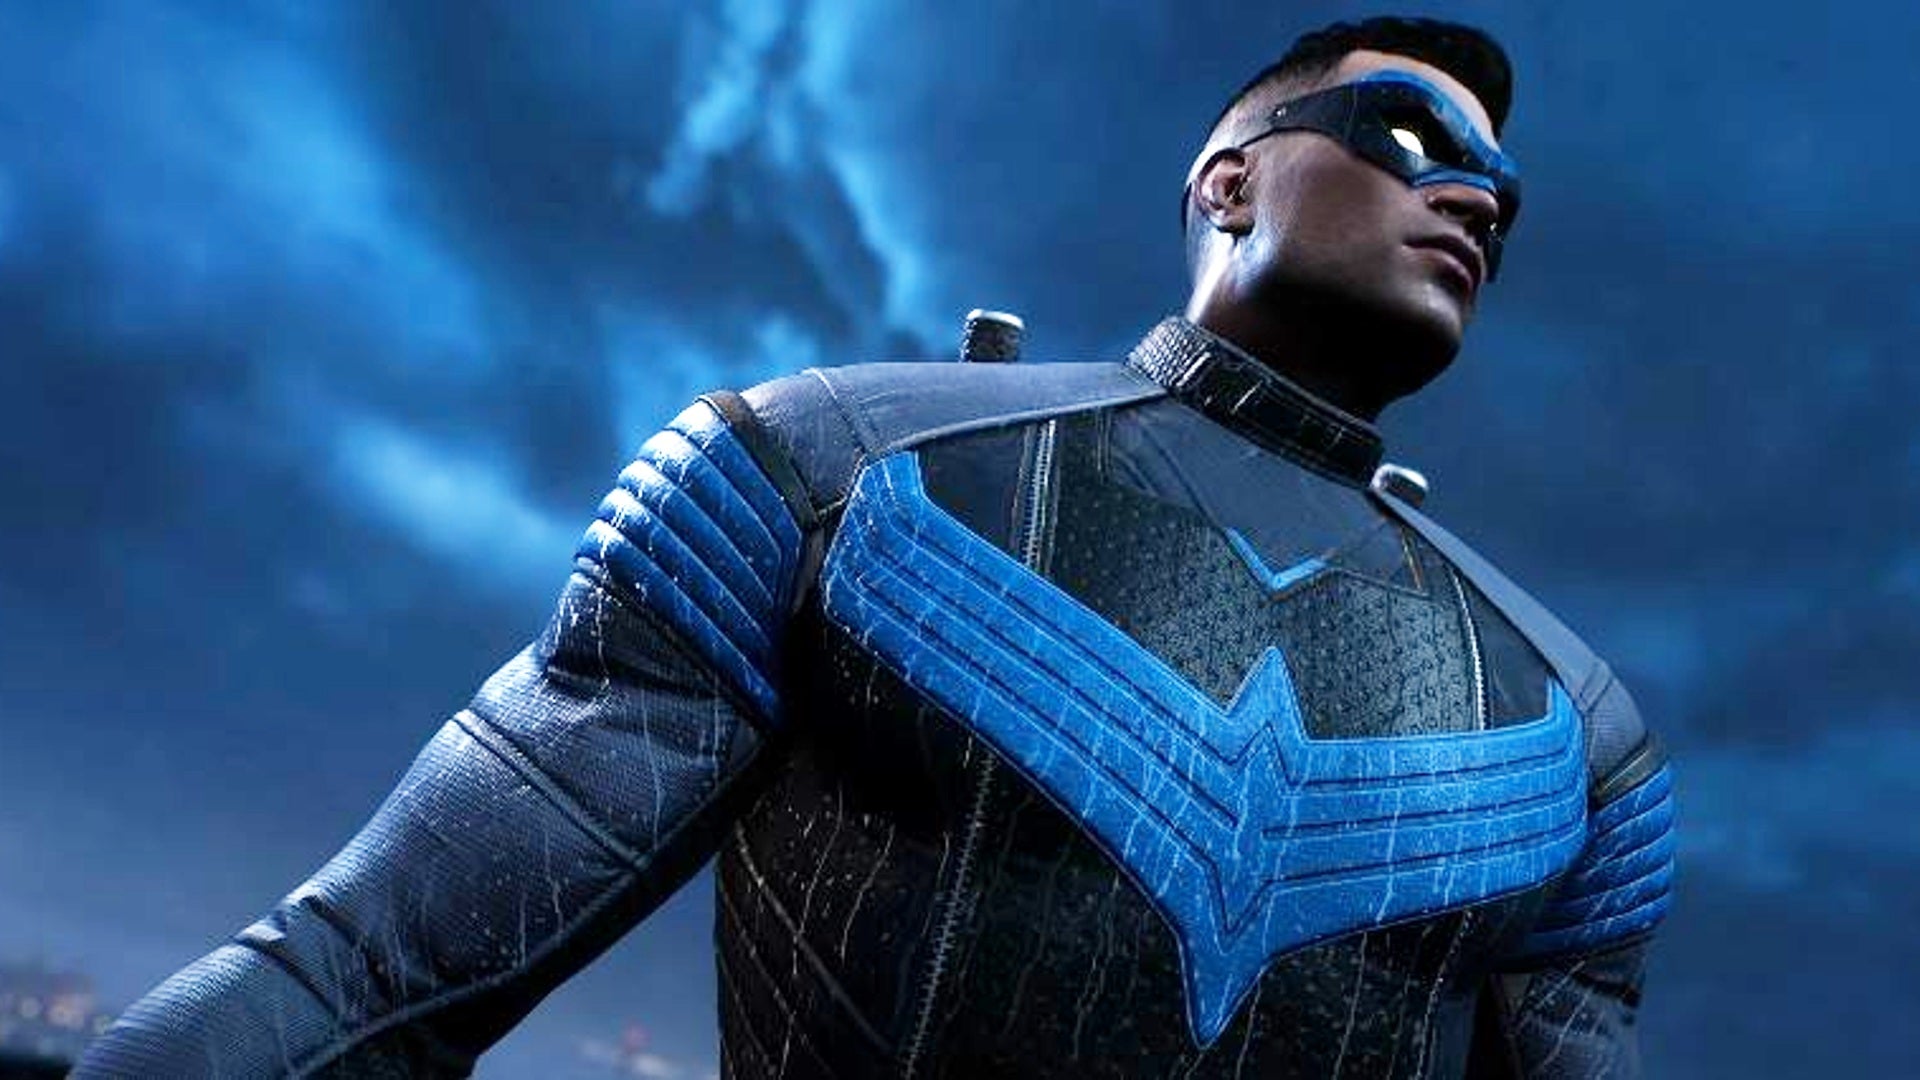 Nightwing showed off some snazzy alternate costumes at Summer Game Fest 2022.